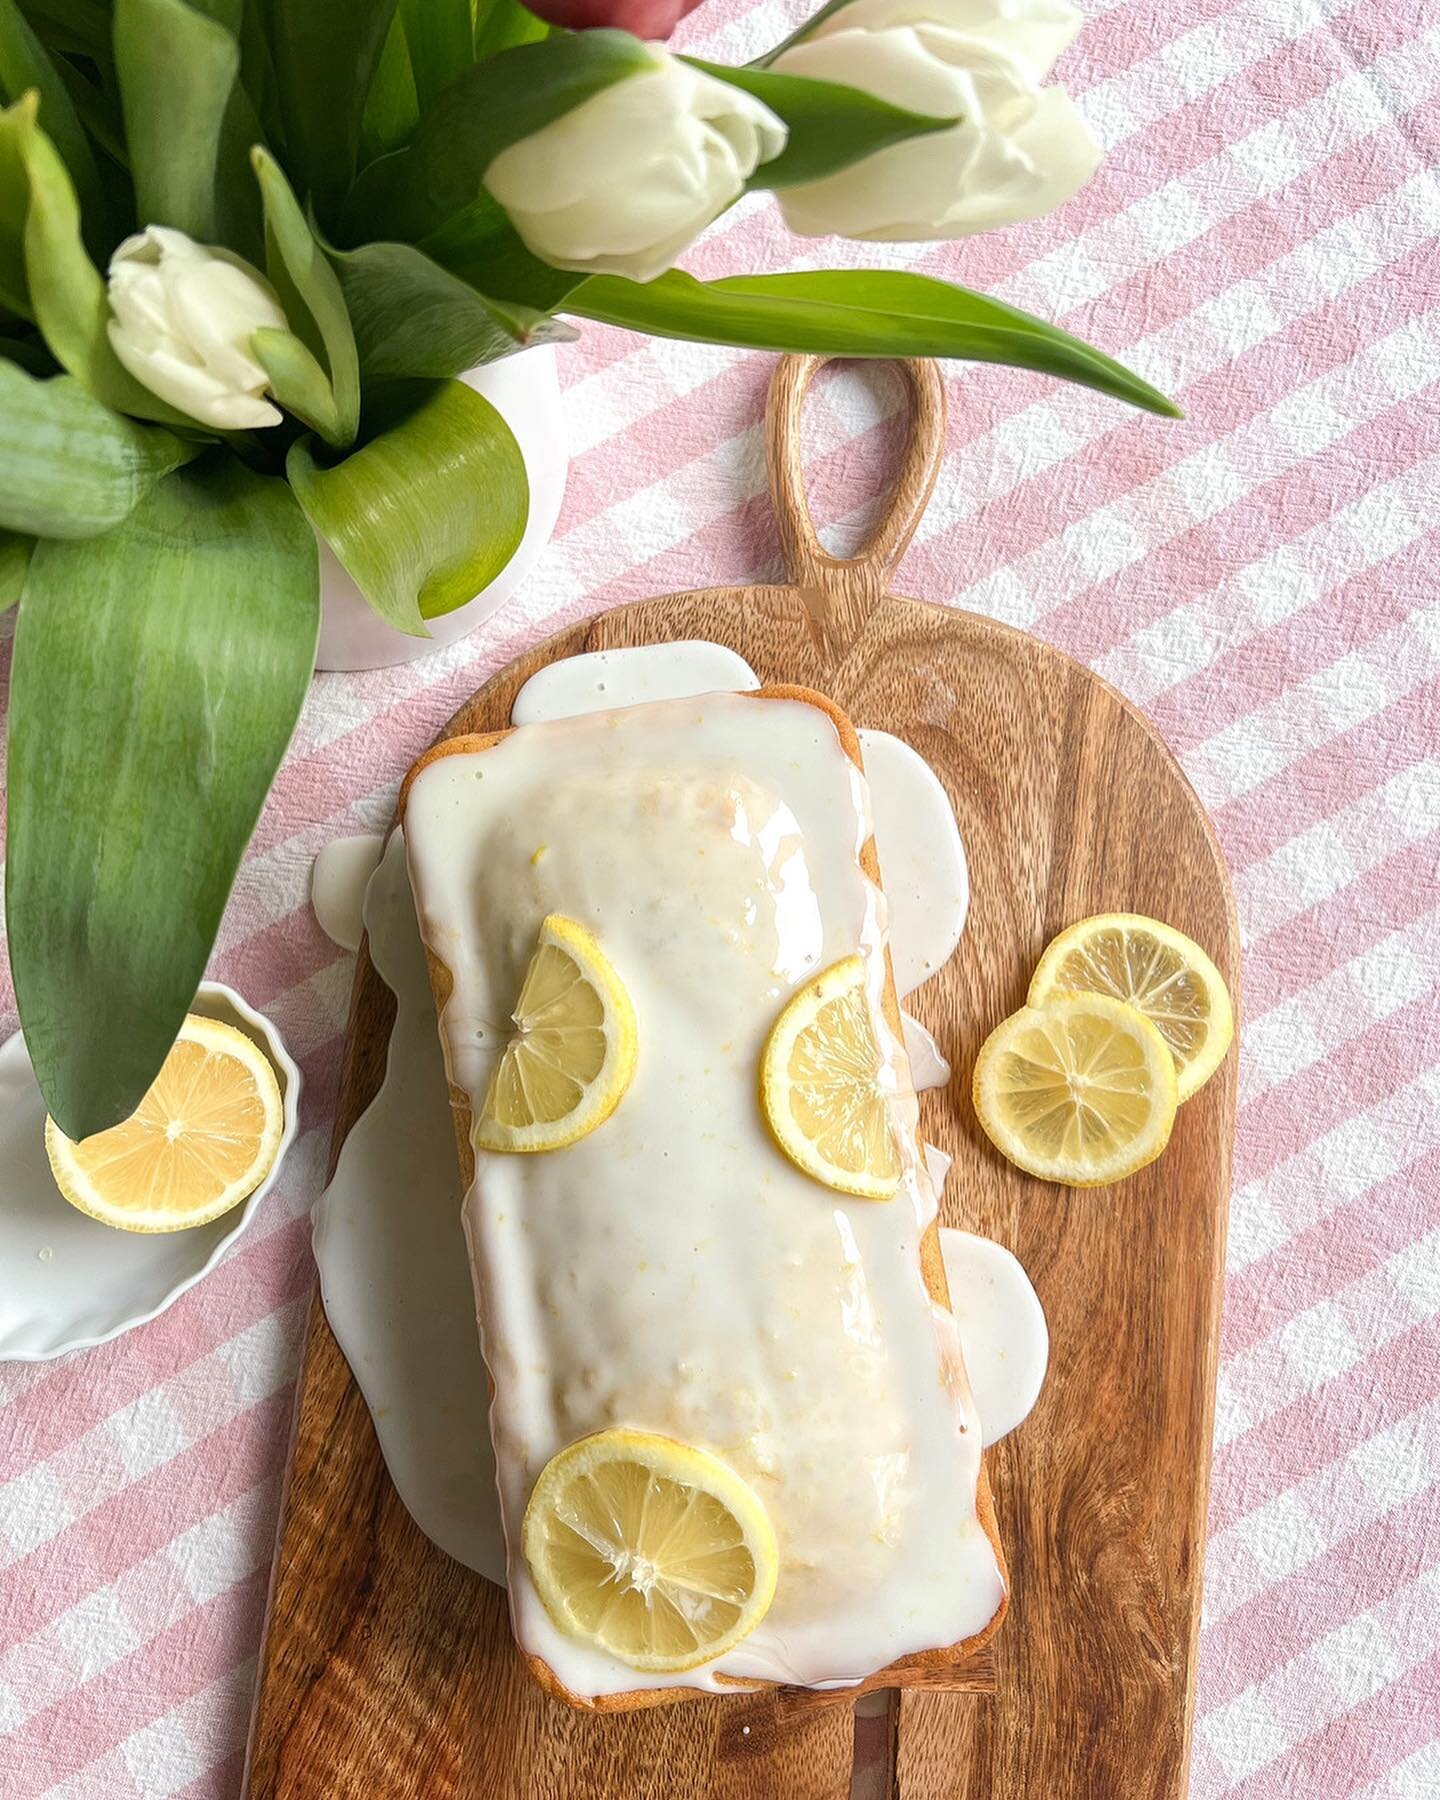 Are you looking for an easy and delicious treat to make? 🍋 Its bright, tangy flavor and light, fluffy texture make it a classic favorite treat. Whether you're looking for an afternoon snack, a sweet breakfast, or a unique and beautiful dessert, this